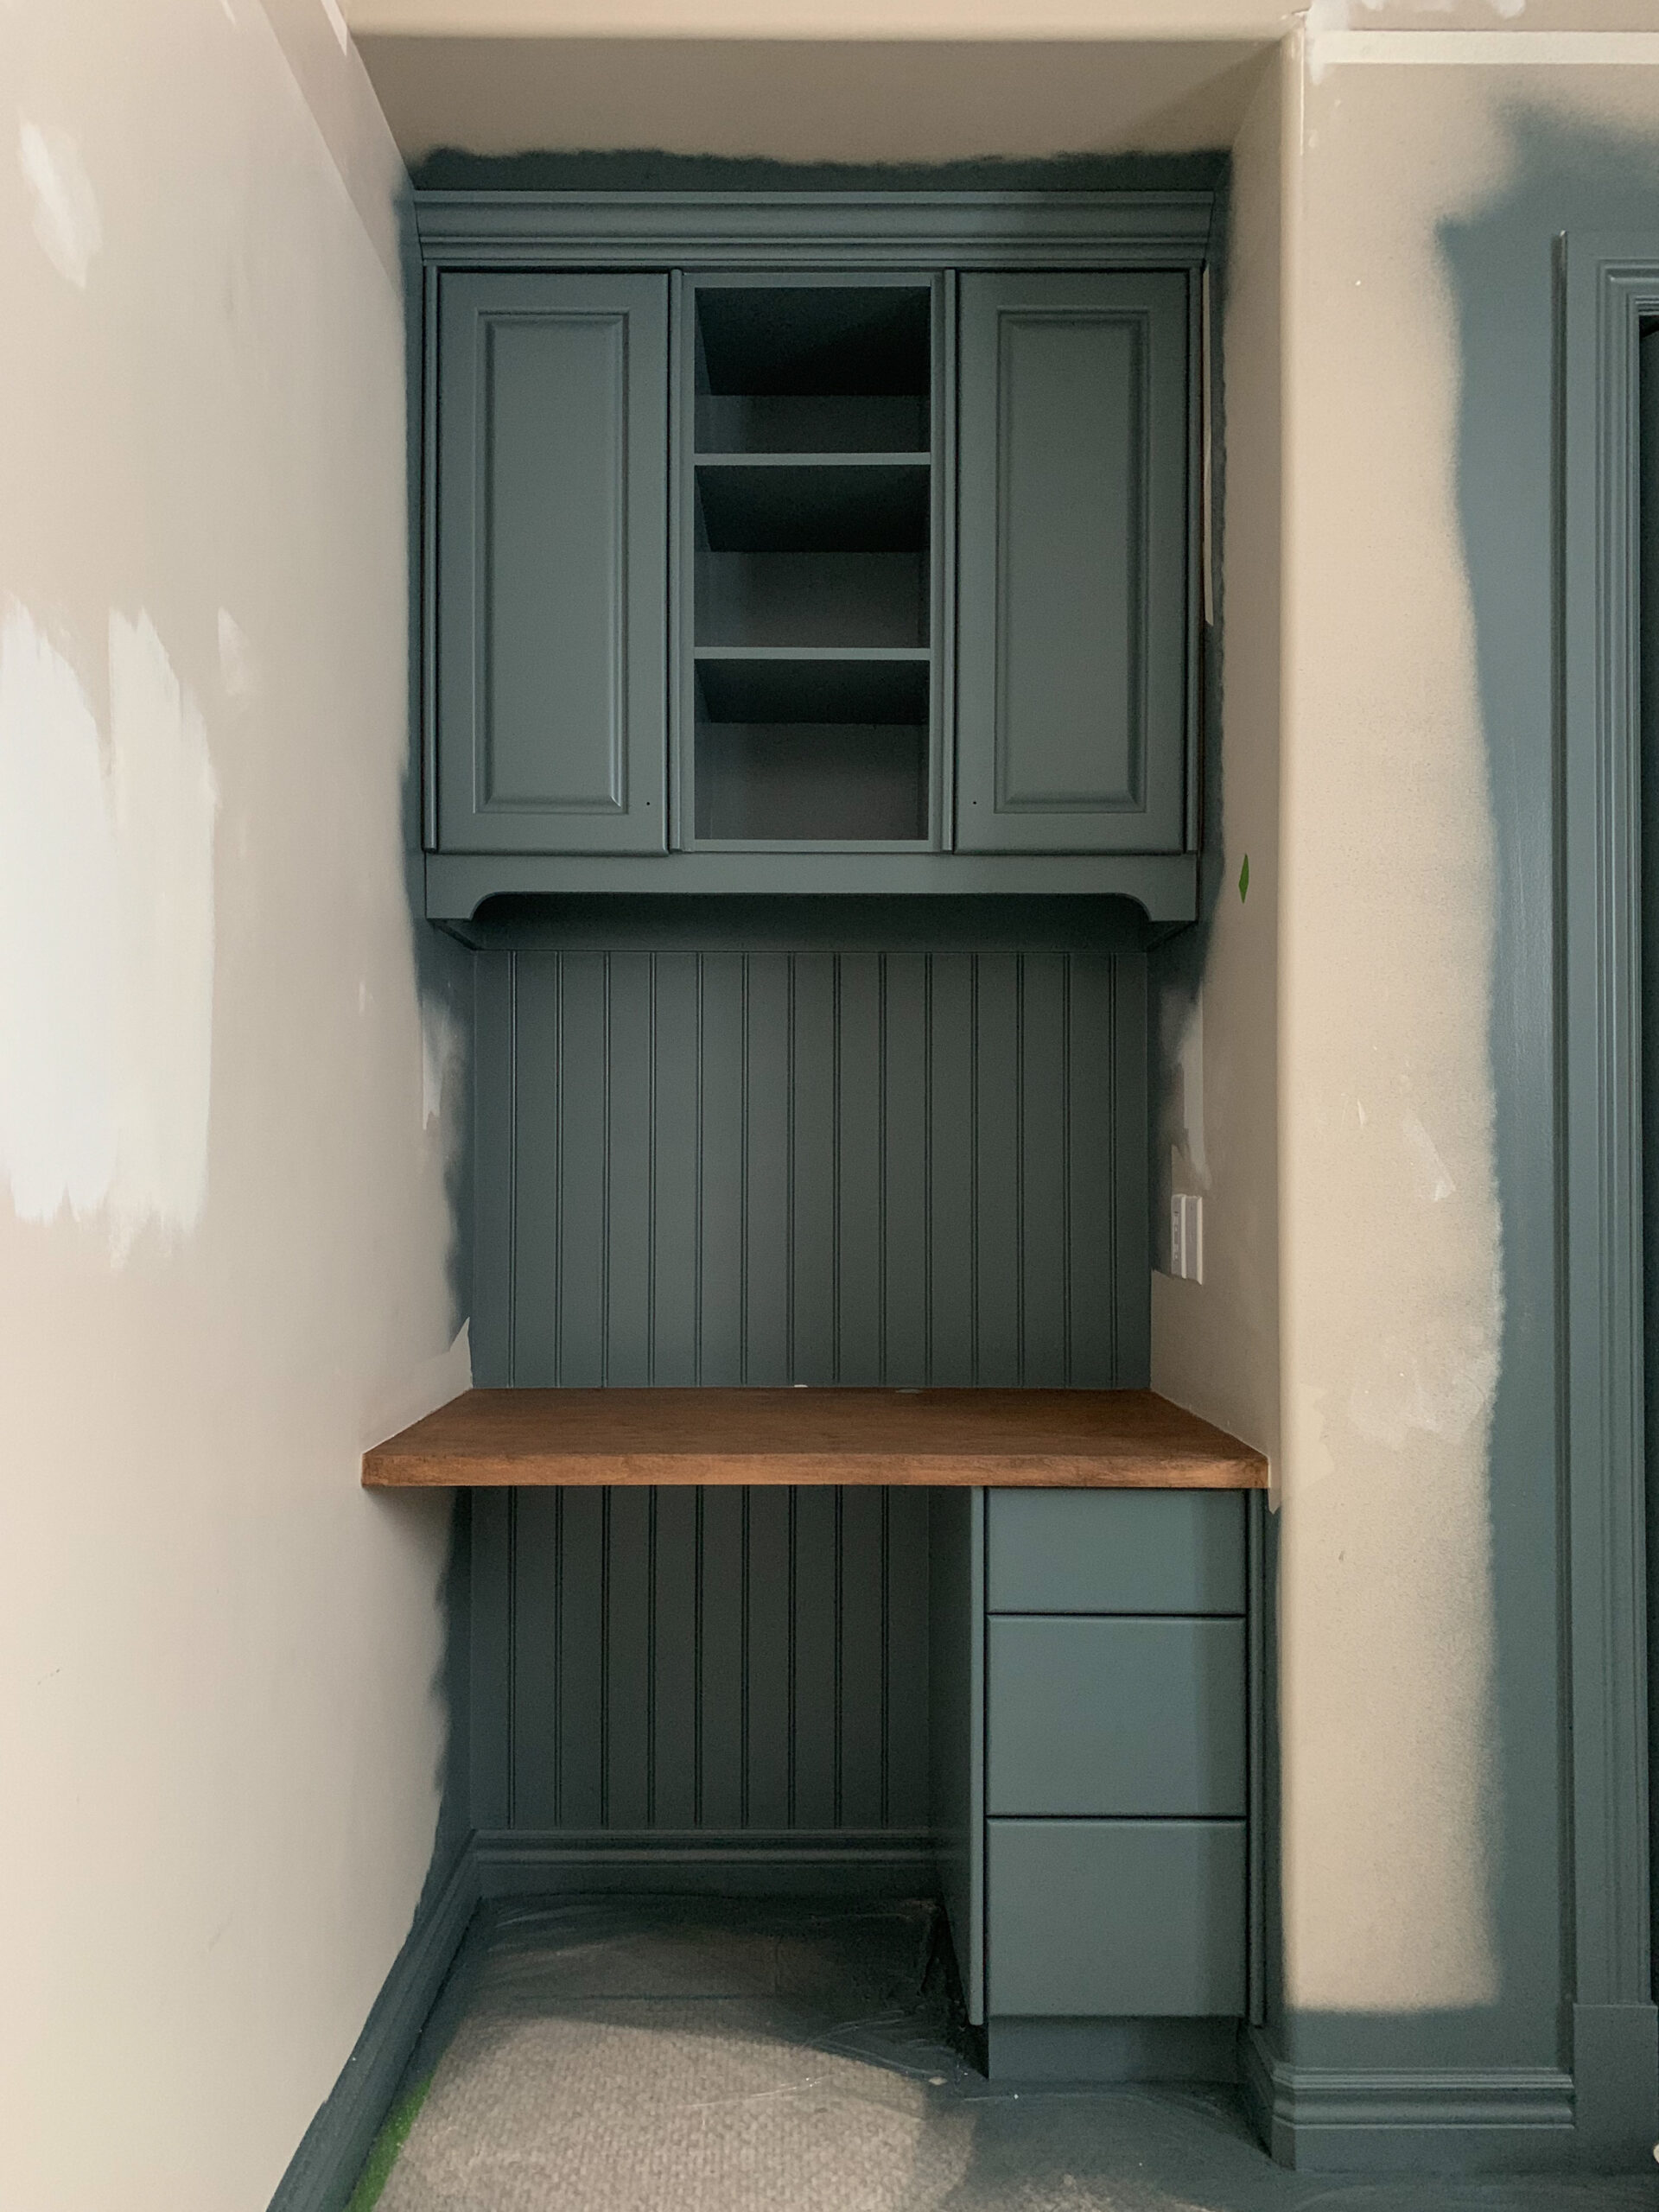 How to Upgrade Builder Grade Cabinets